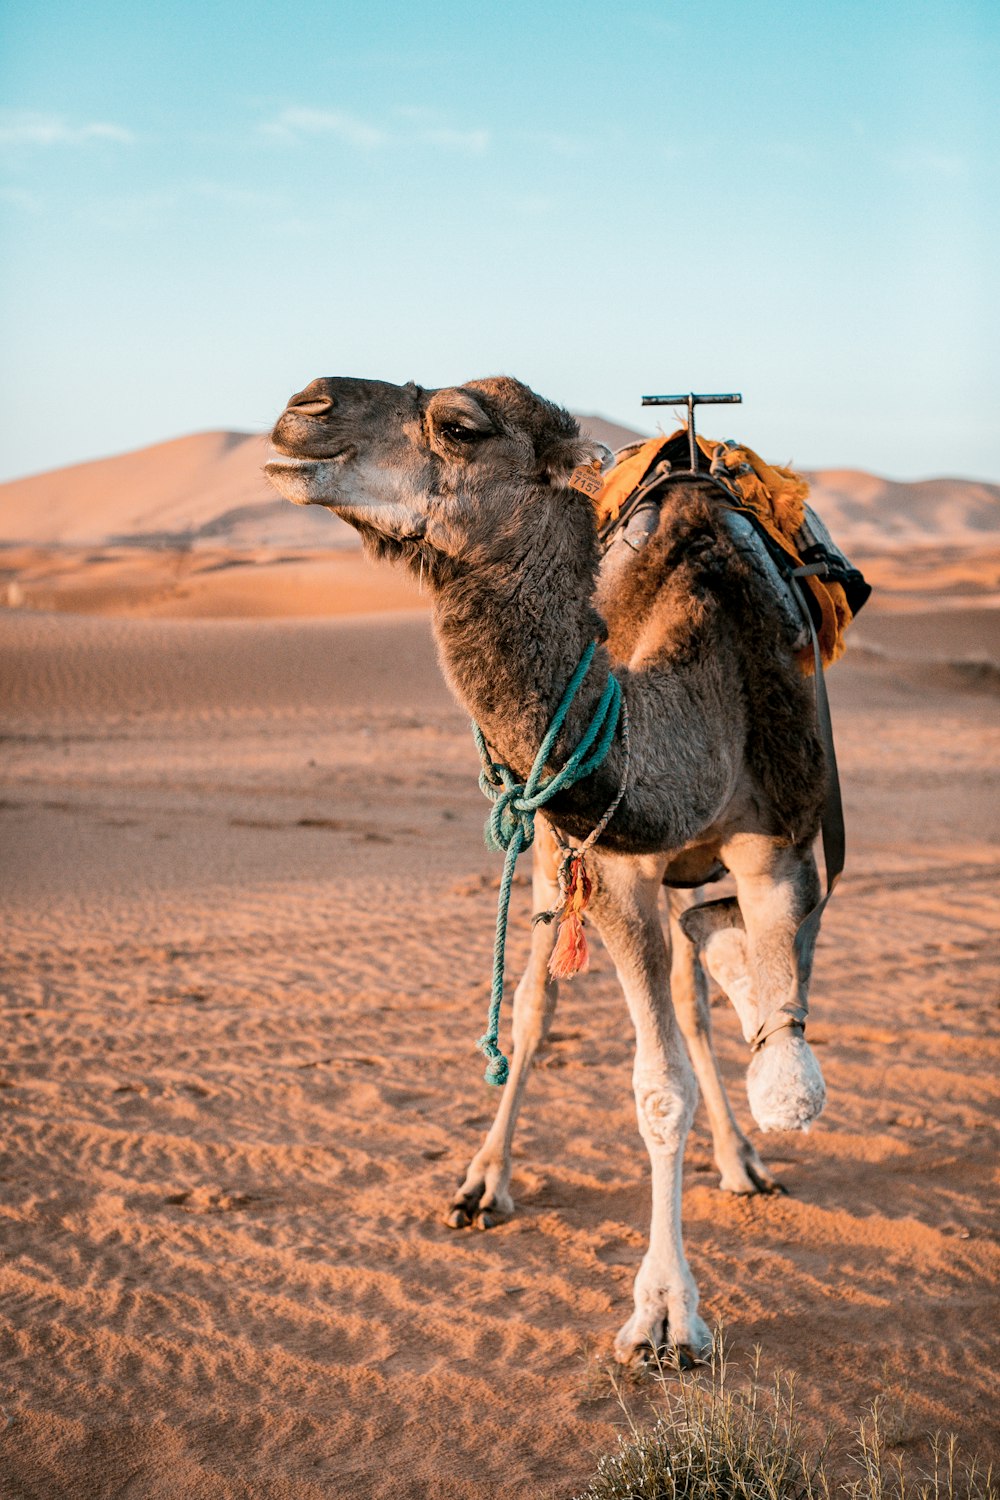 brown camel at the desert during golden hour